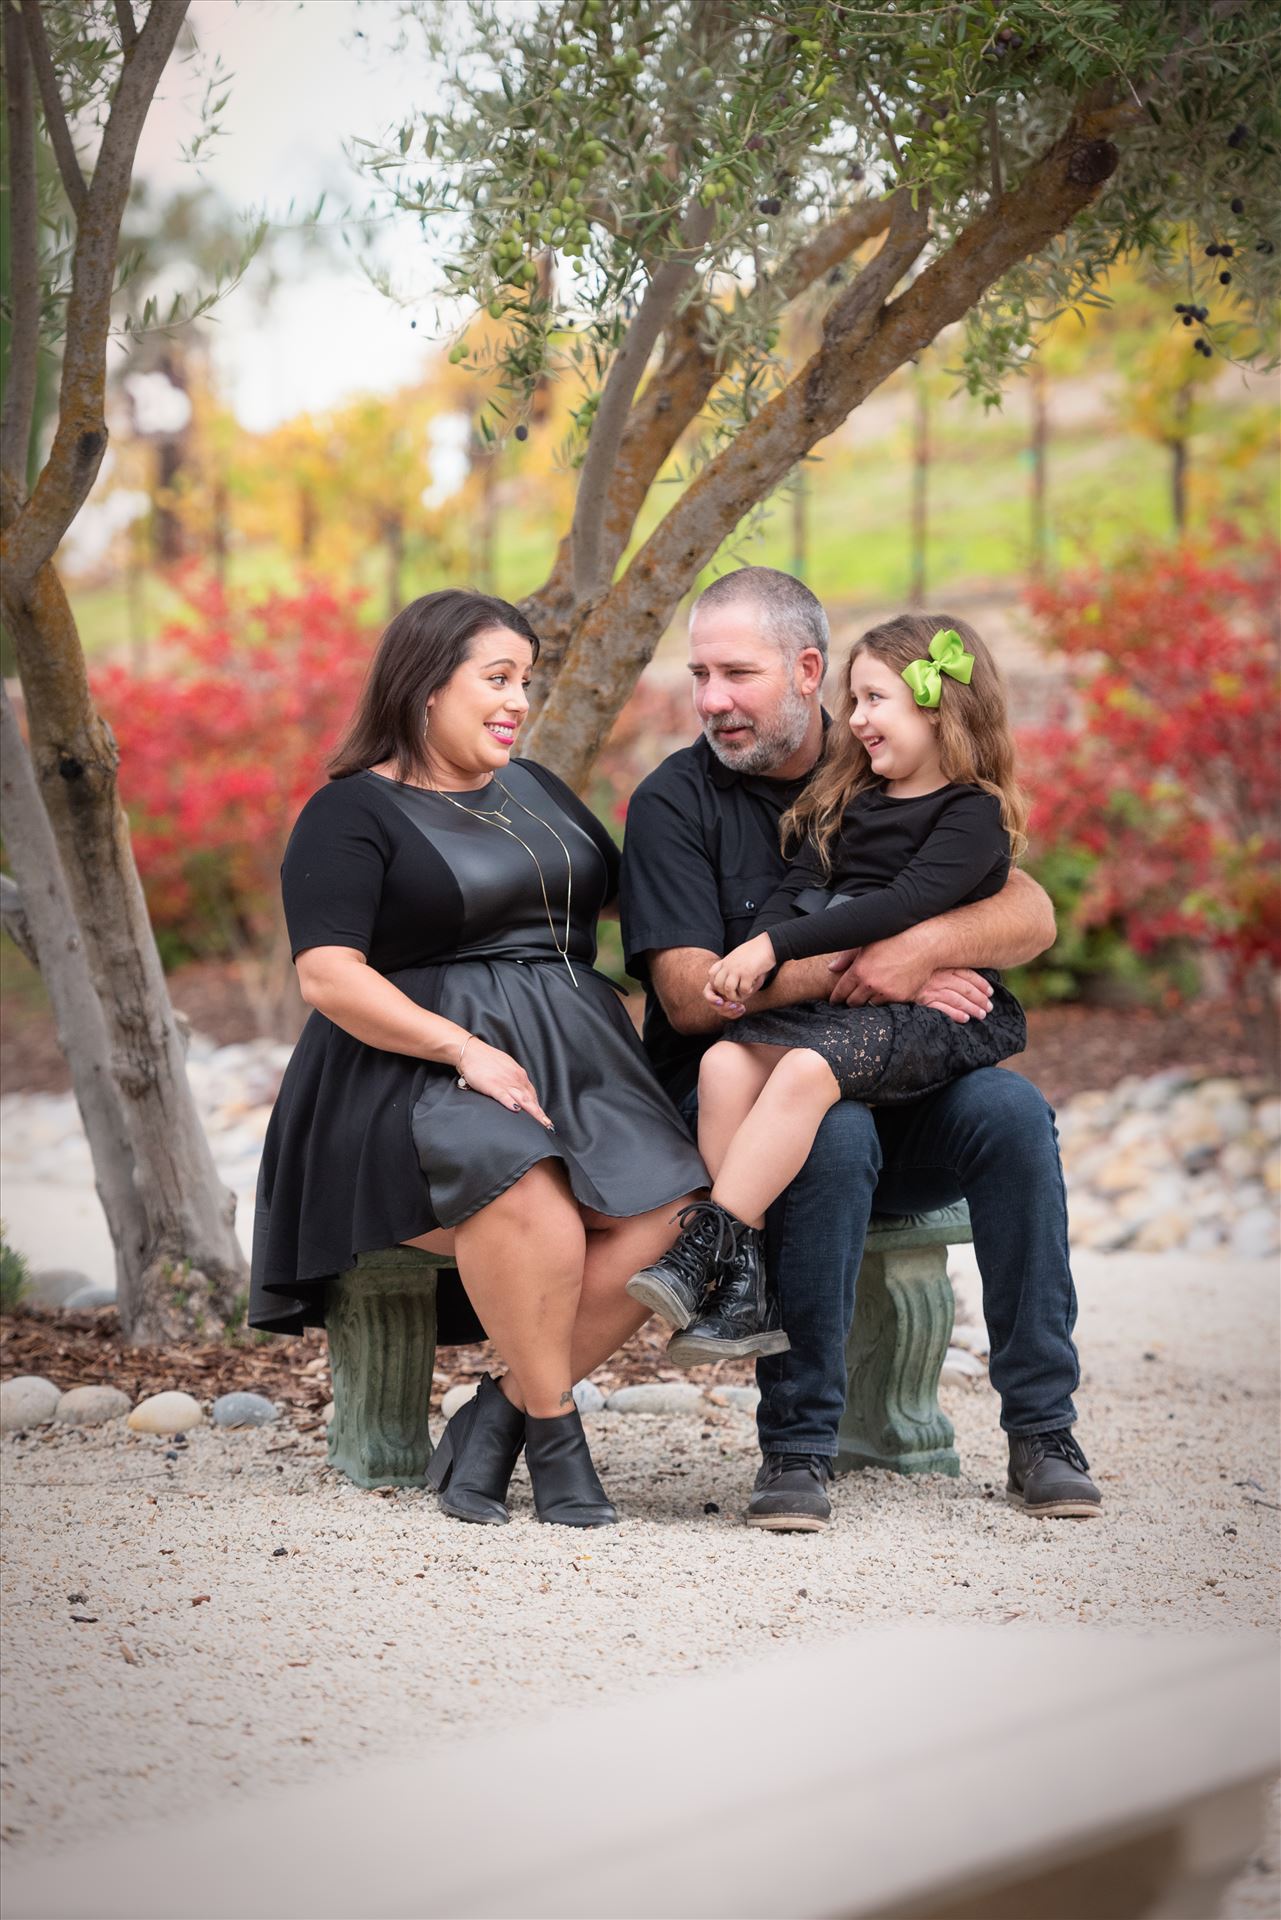 Final-.JPG - Sarah Williams of Mirror's Edge Photography, a San Luis Obispo Wedding, Engagement and Portrait Photographer, captures the Foster Family Fall Session at the gorgeous Allegretto Resort and Vineyards in Paso Robles, California. Fall Colors. by Sarah Williams